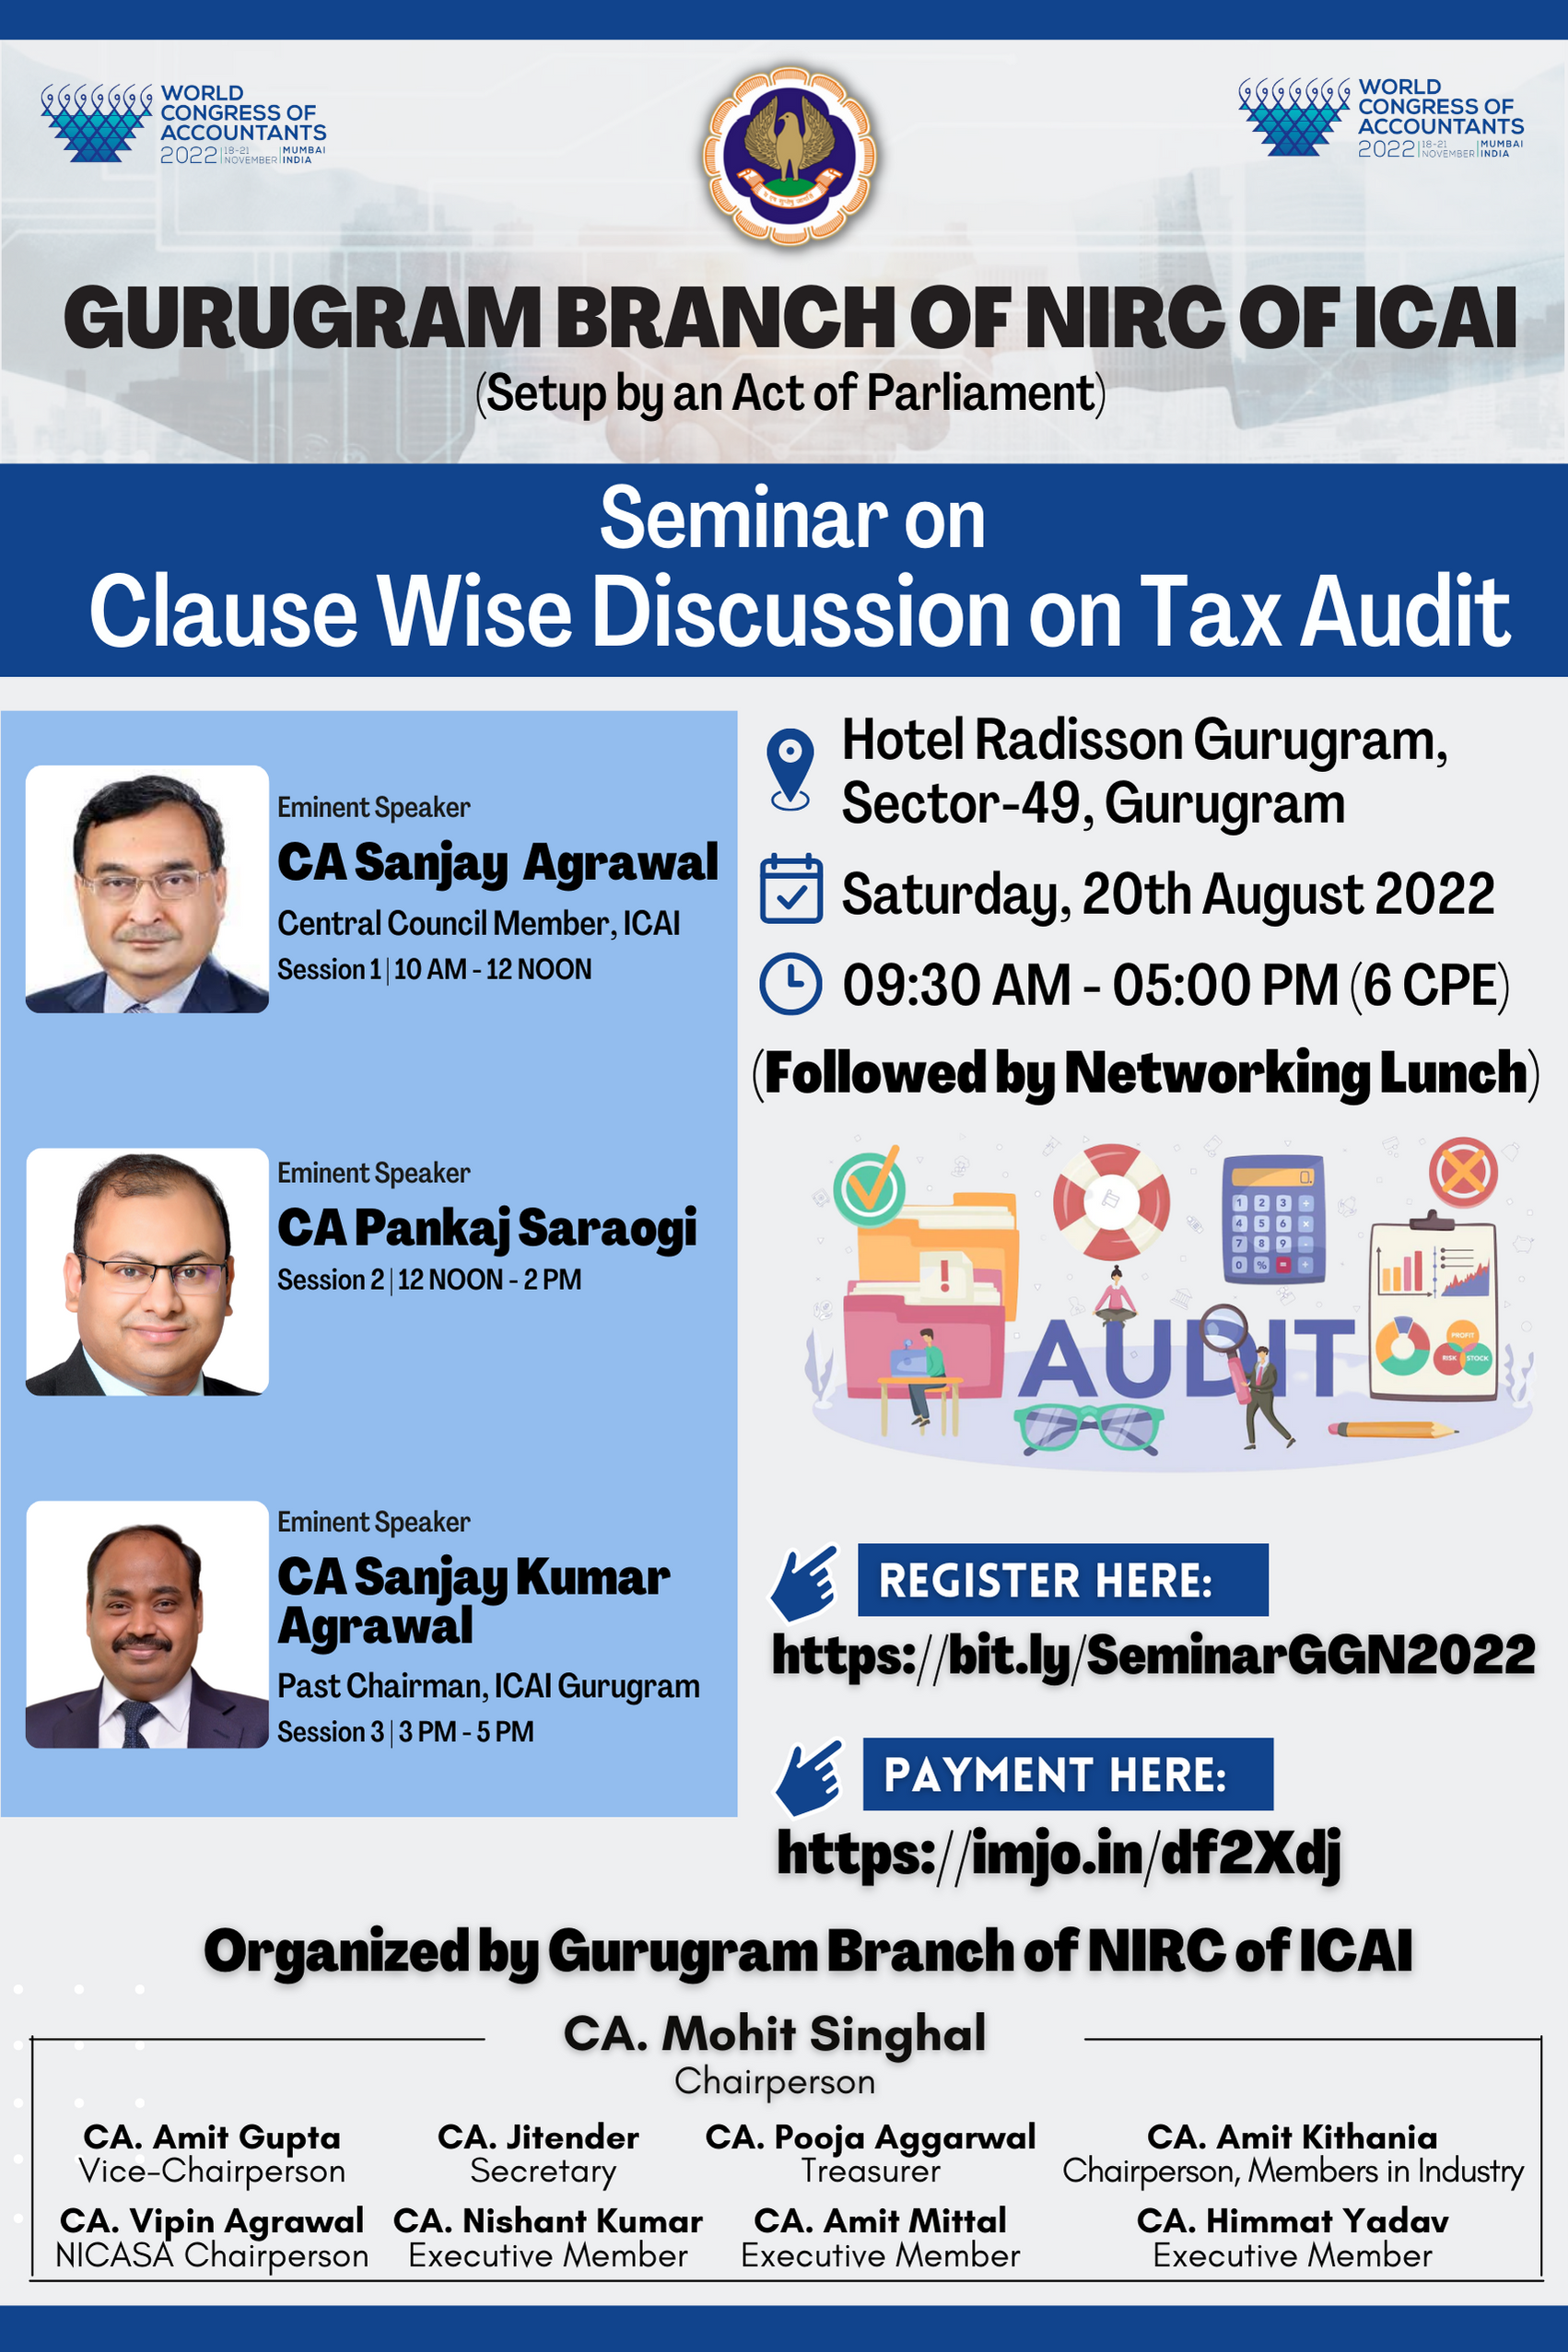 Physical Seminar on Clause Wise Discussion on Tax Audit